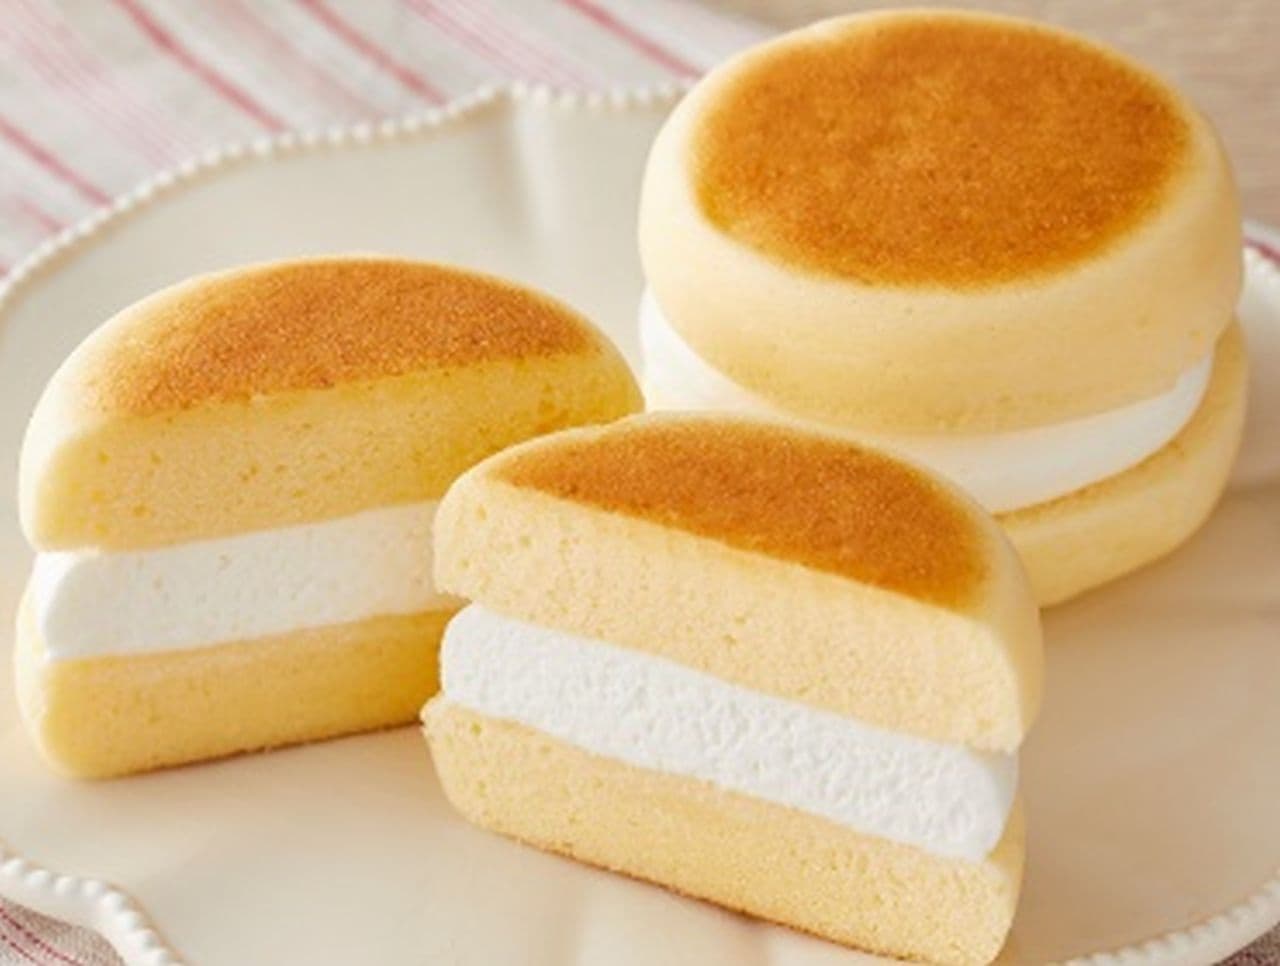 LAWSON to launch a total of three new products: cream puffs made with Niigata pears and soufflé bread made with rice flour and milk.